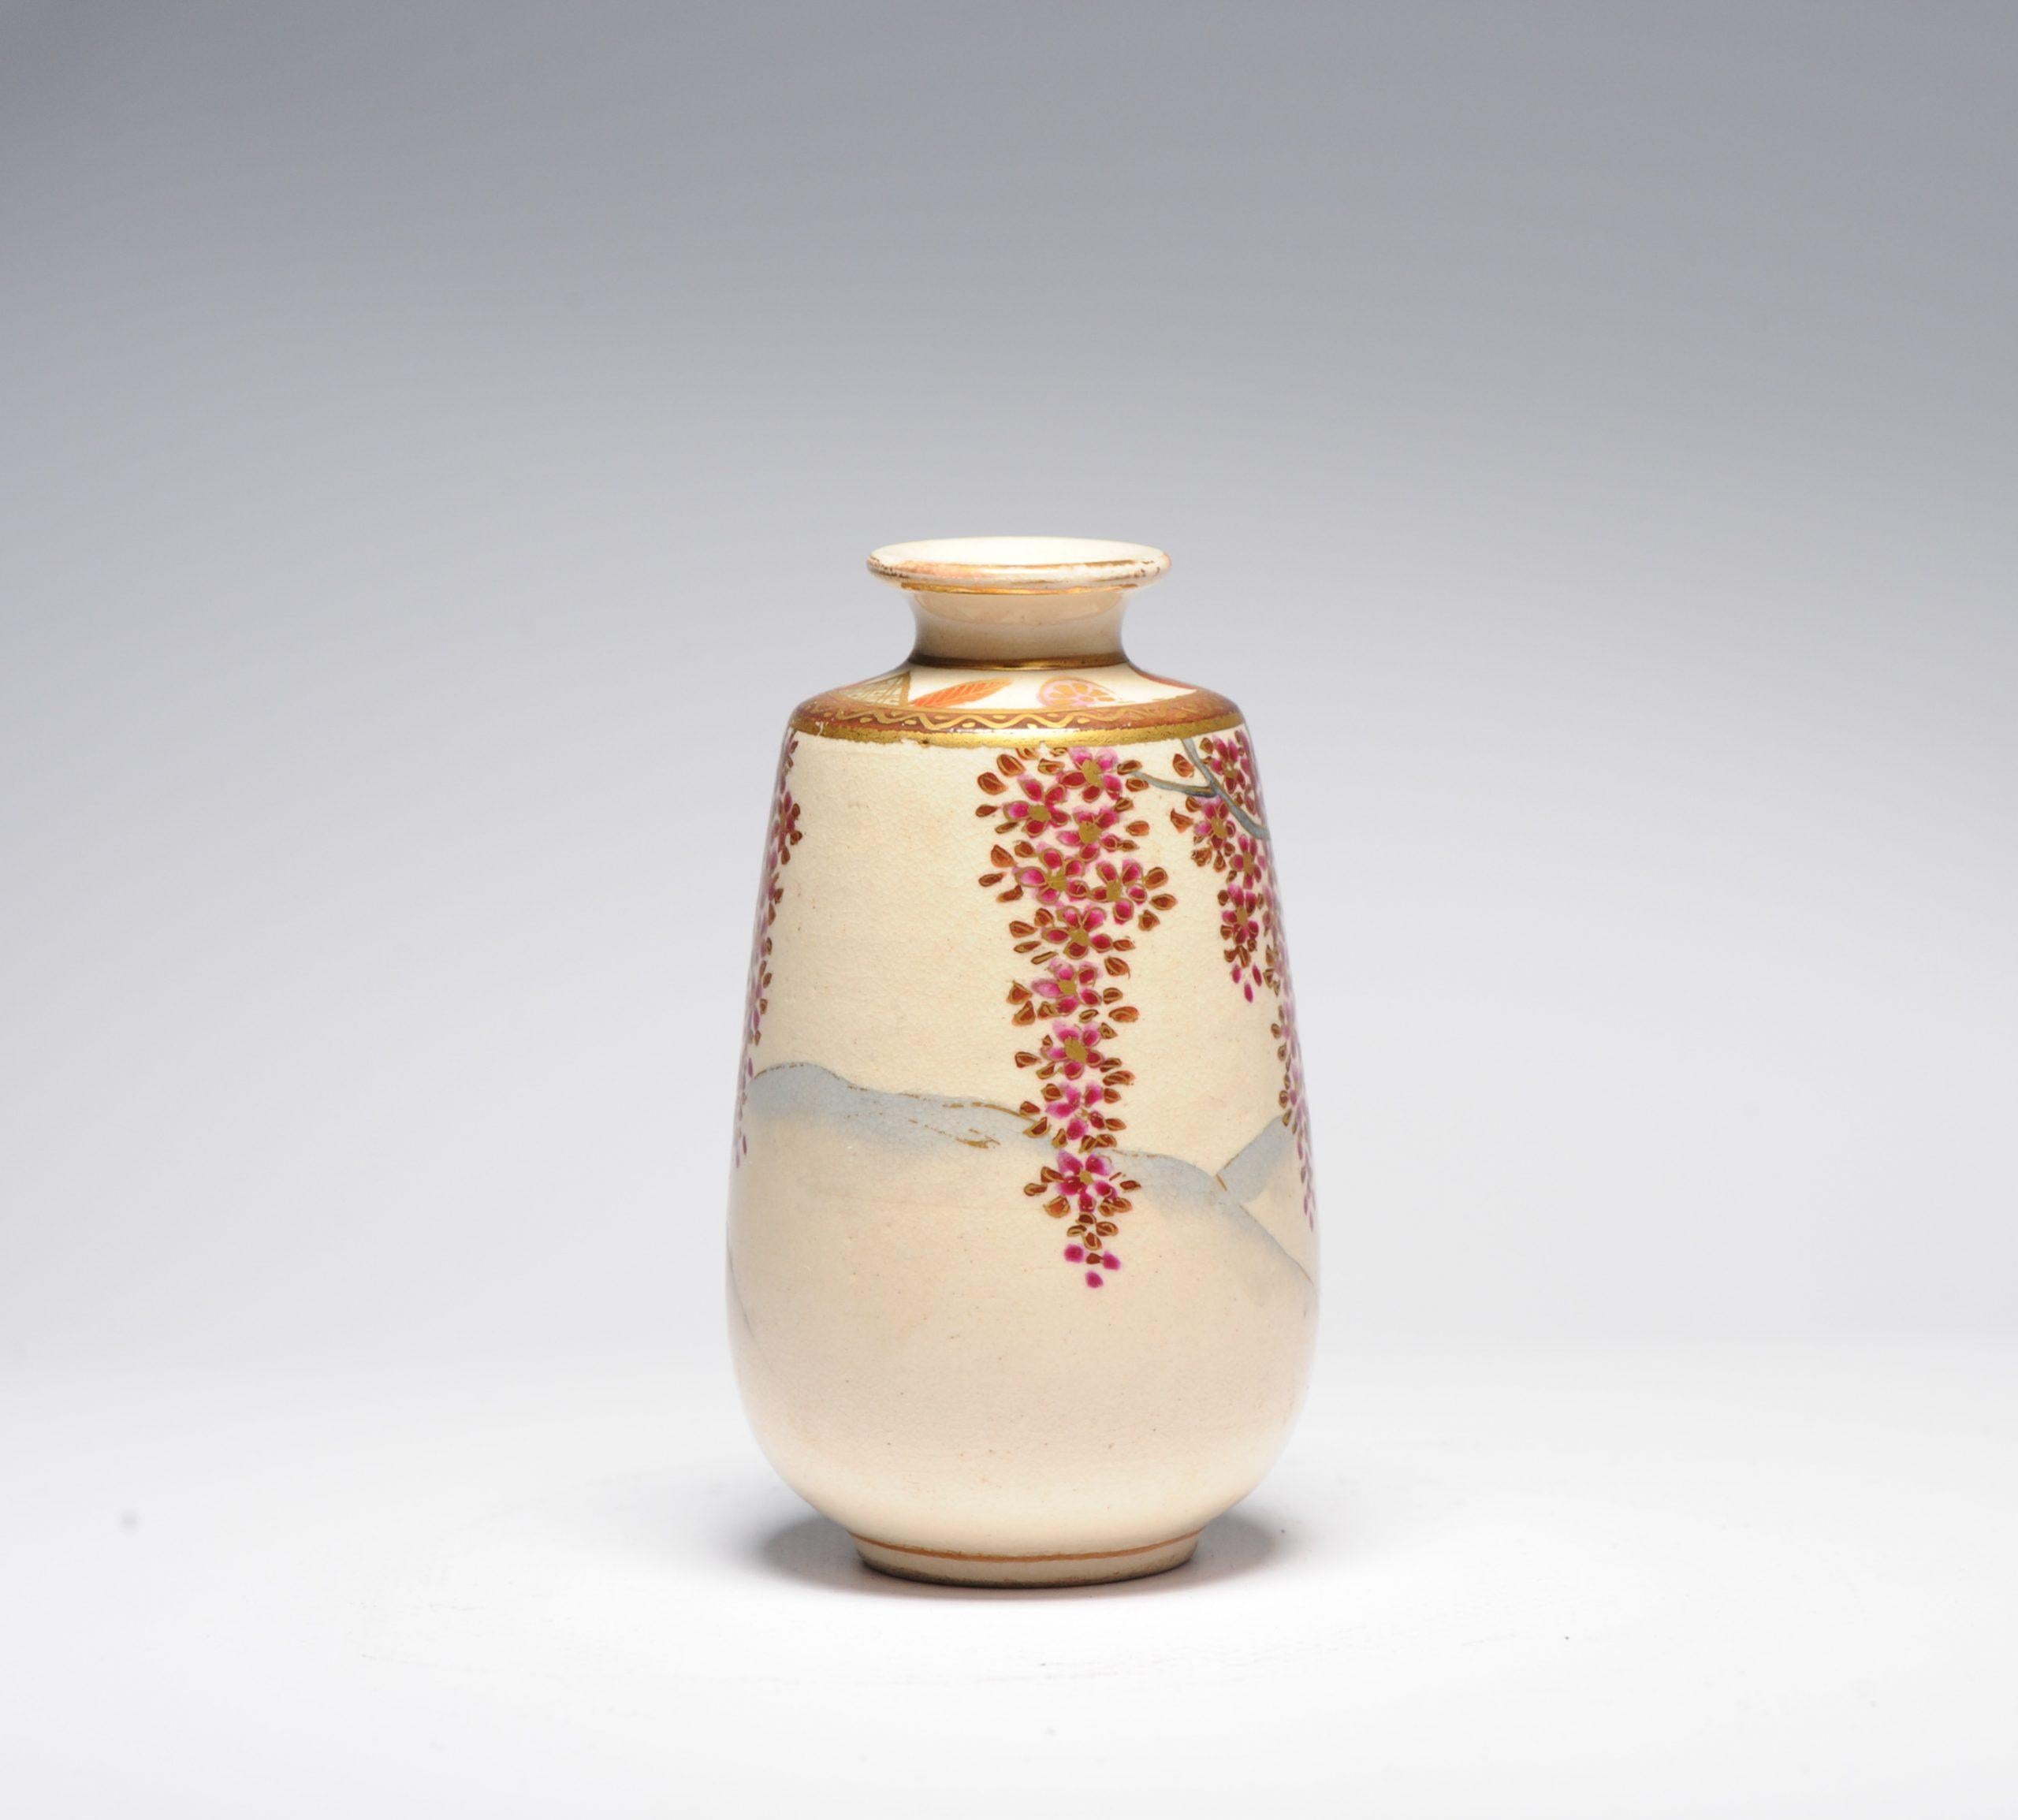 Sharing with you is this nice satsuma miniature vase decorated with wisteria.

Marked: Hotoda

Condition

Overall Condition Perfect. Size 91mm high

Period

Meiji Periode (1867-1912).